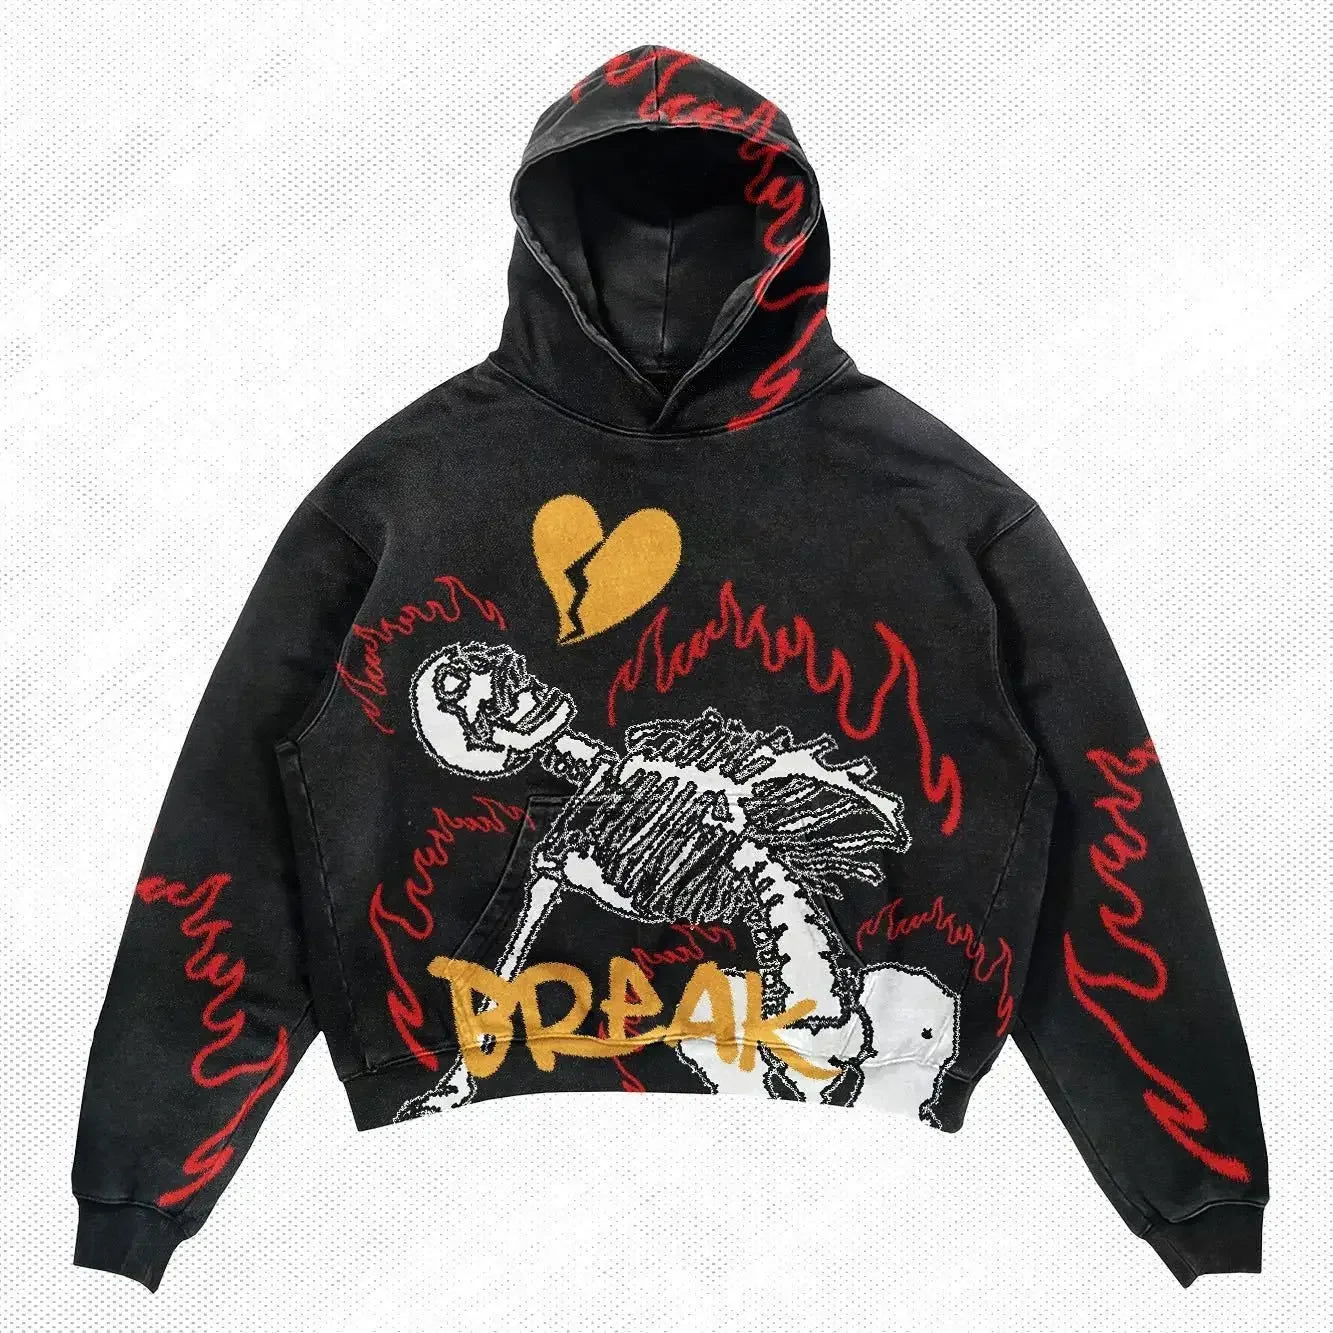 A Maramalive™ Explosions Printed Skull Y2K Retro Hooded Sweater Coat Street Style Gothic Casual Fashion Hooded Sweater Men's Female featuring a skeletal figure, broken heart, red flame designs, and the word "BREAK" in yellow across the front. Perfect for those who love edgy men's clothing.